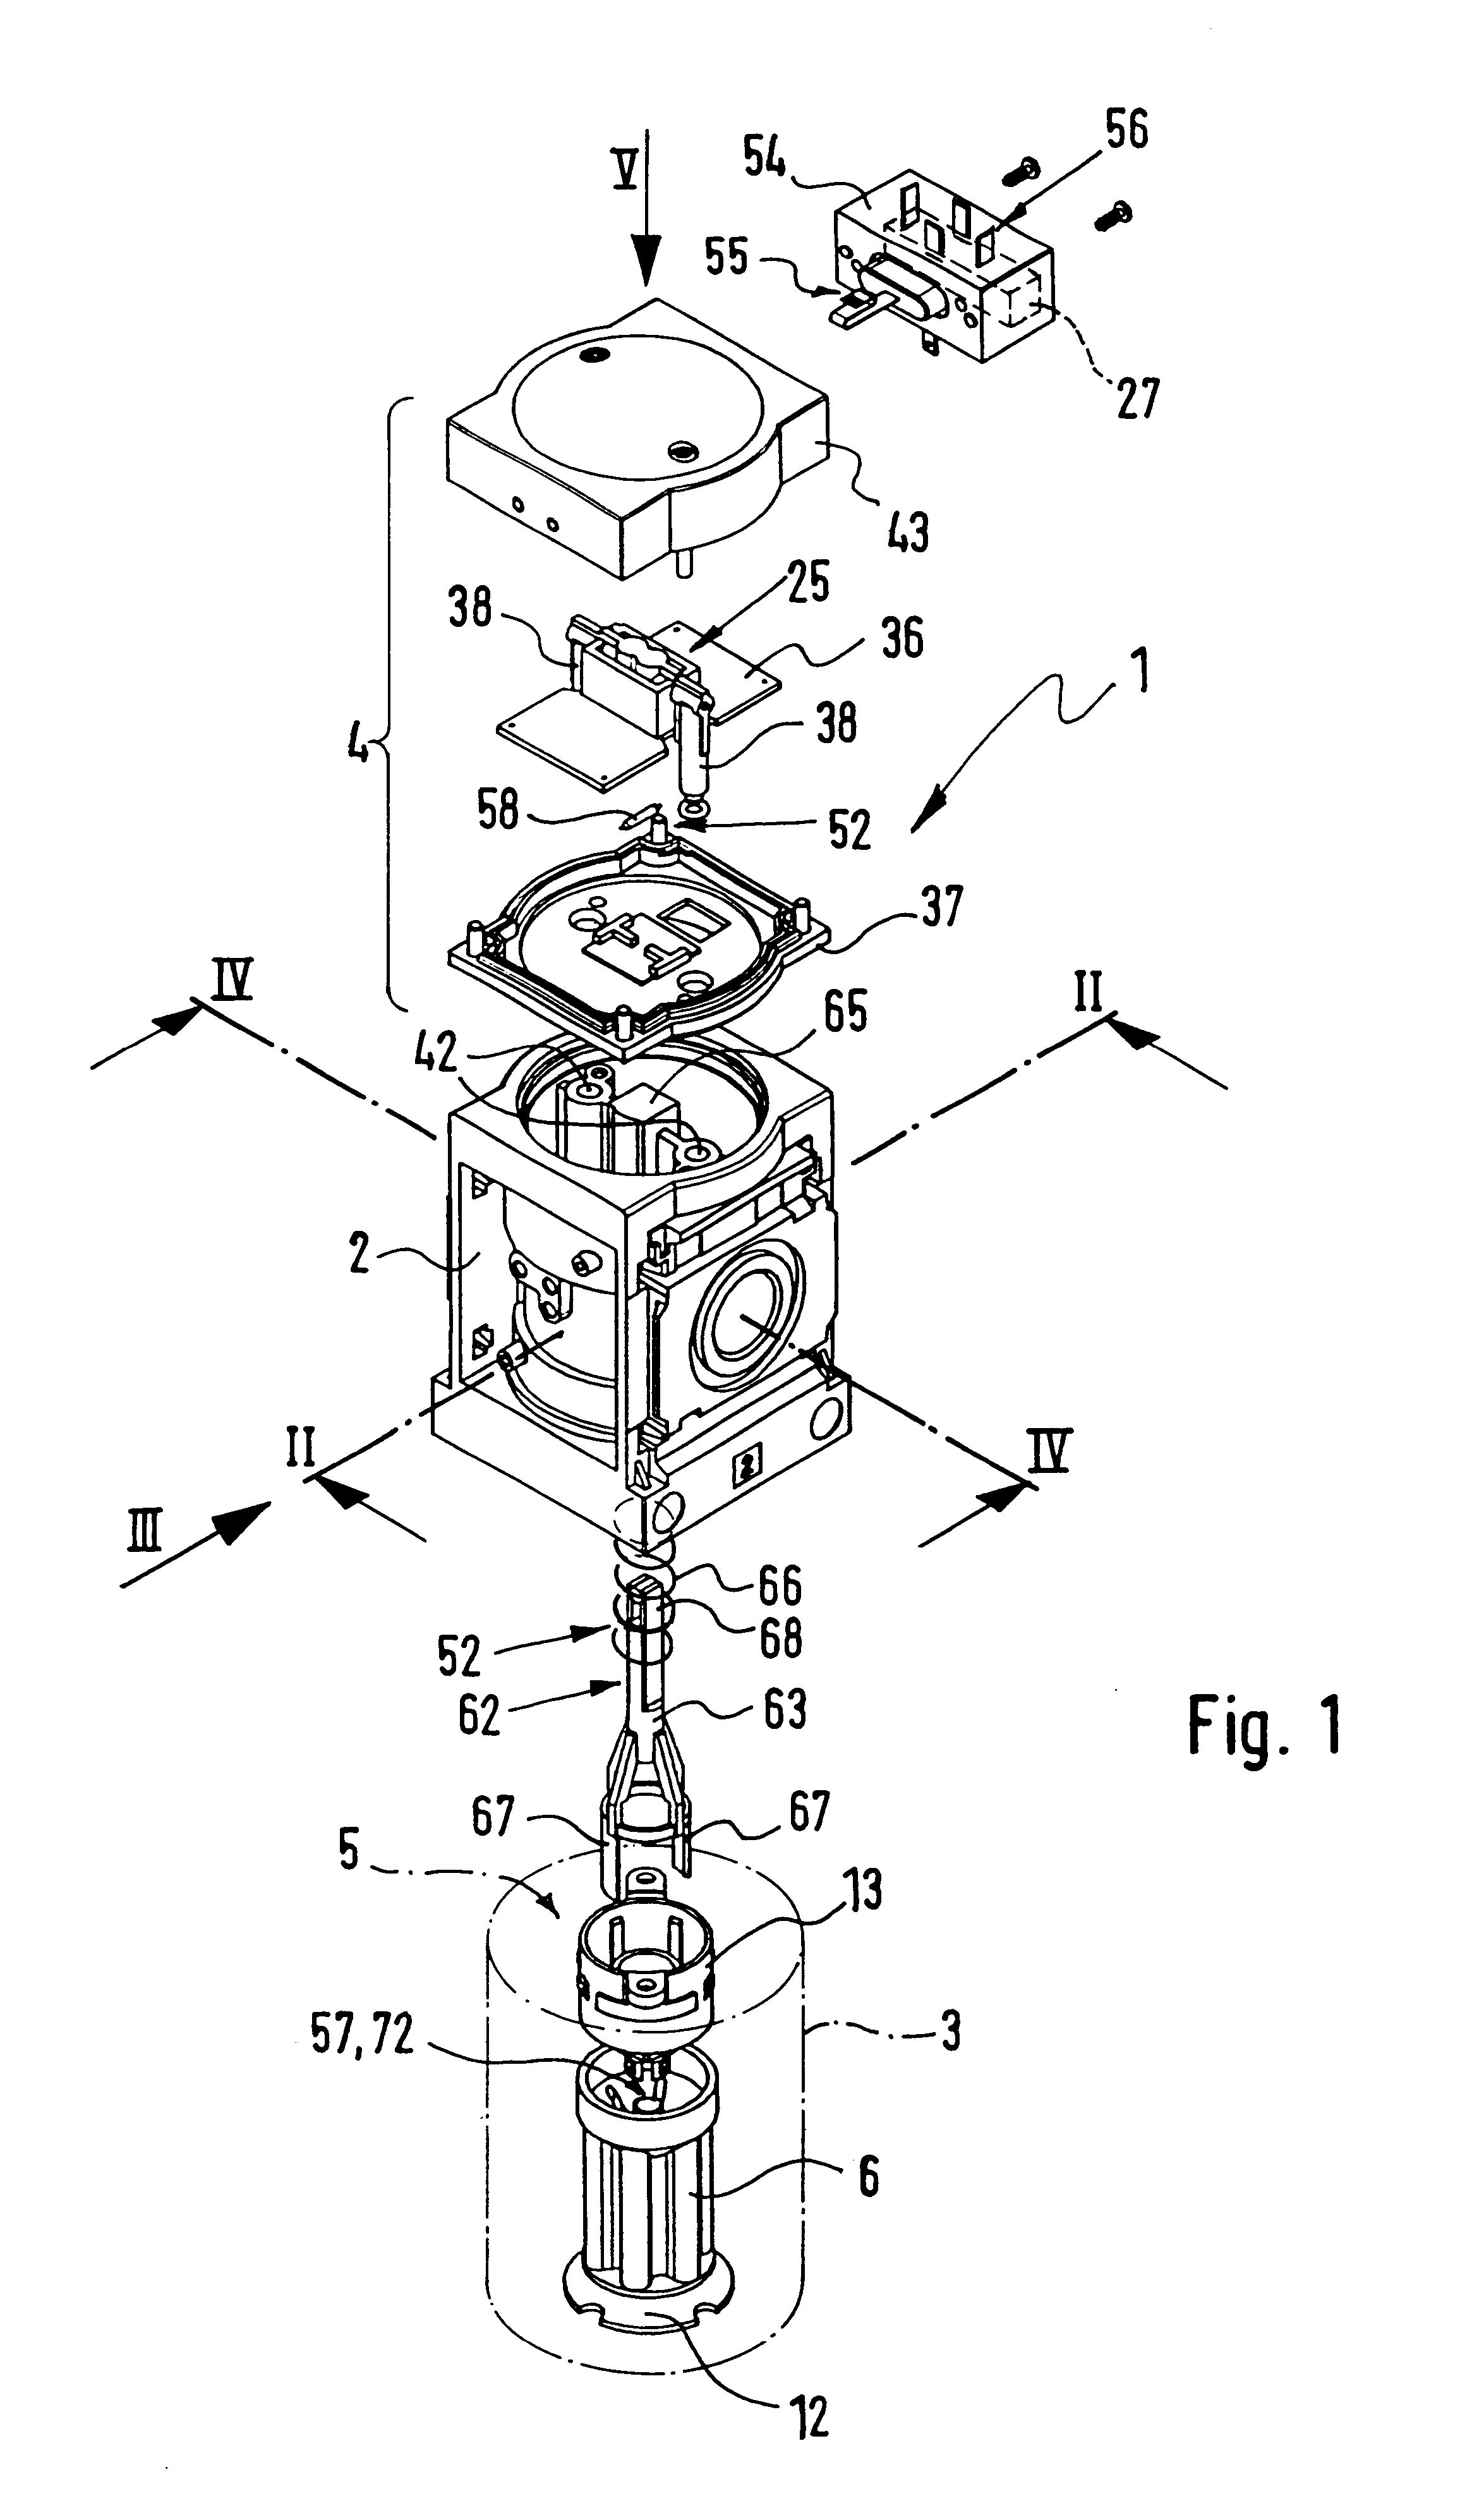 Filtering apparatus for filtering compressed air